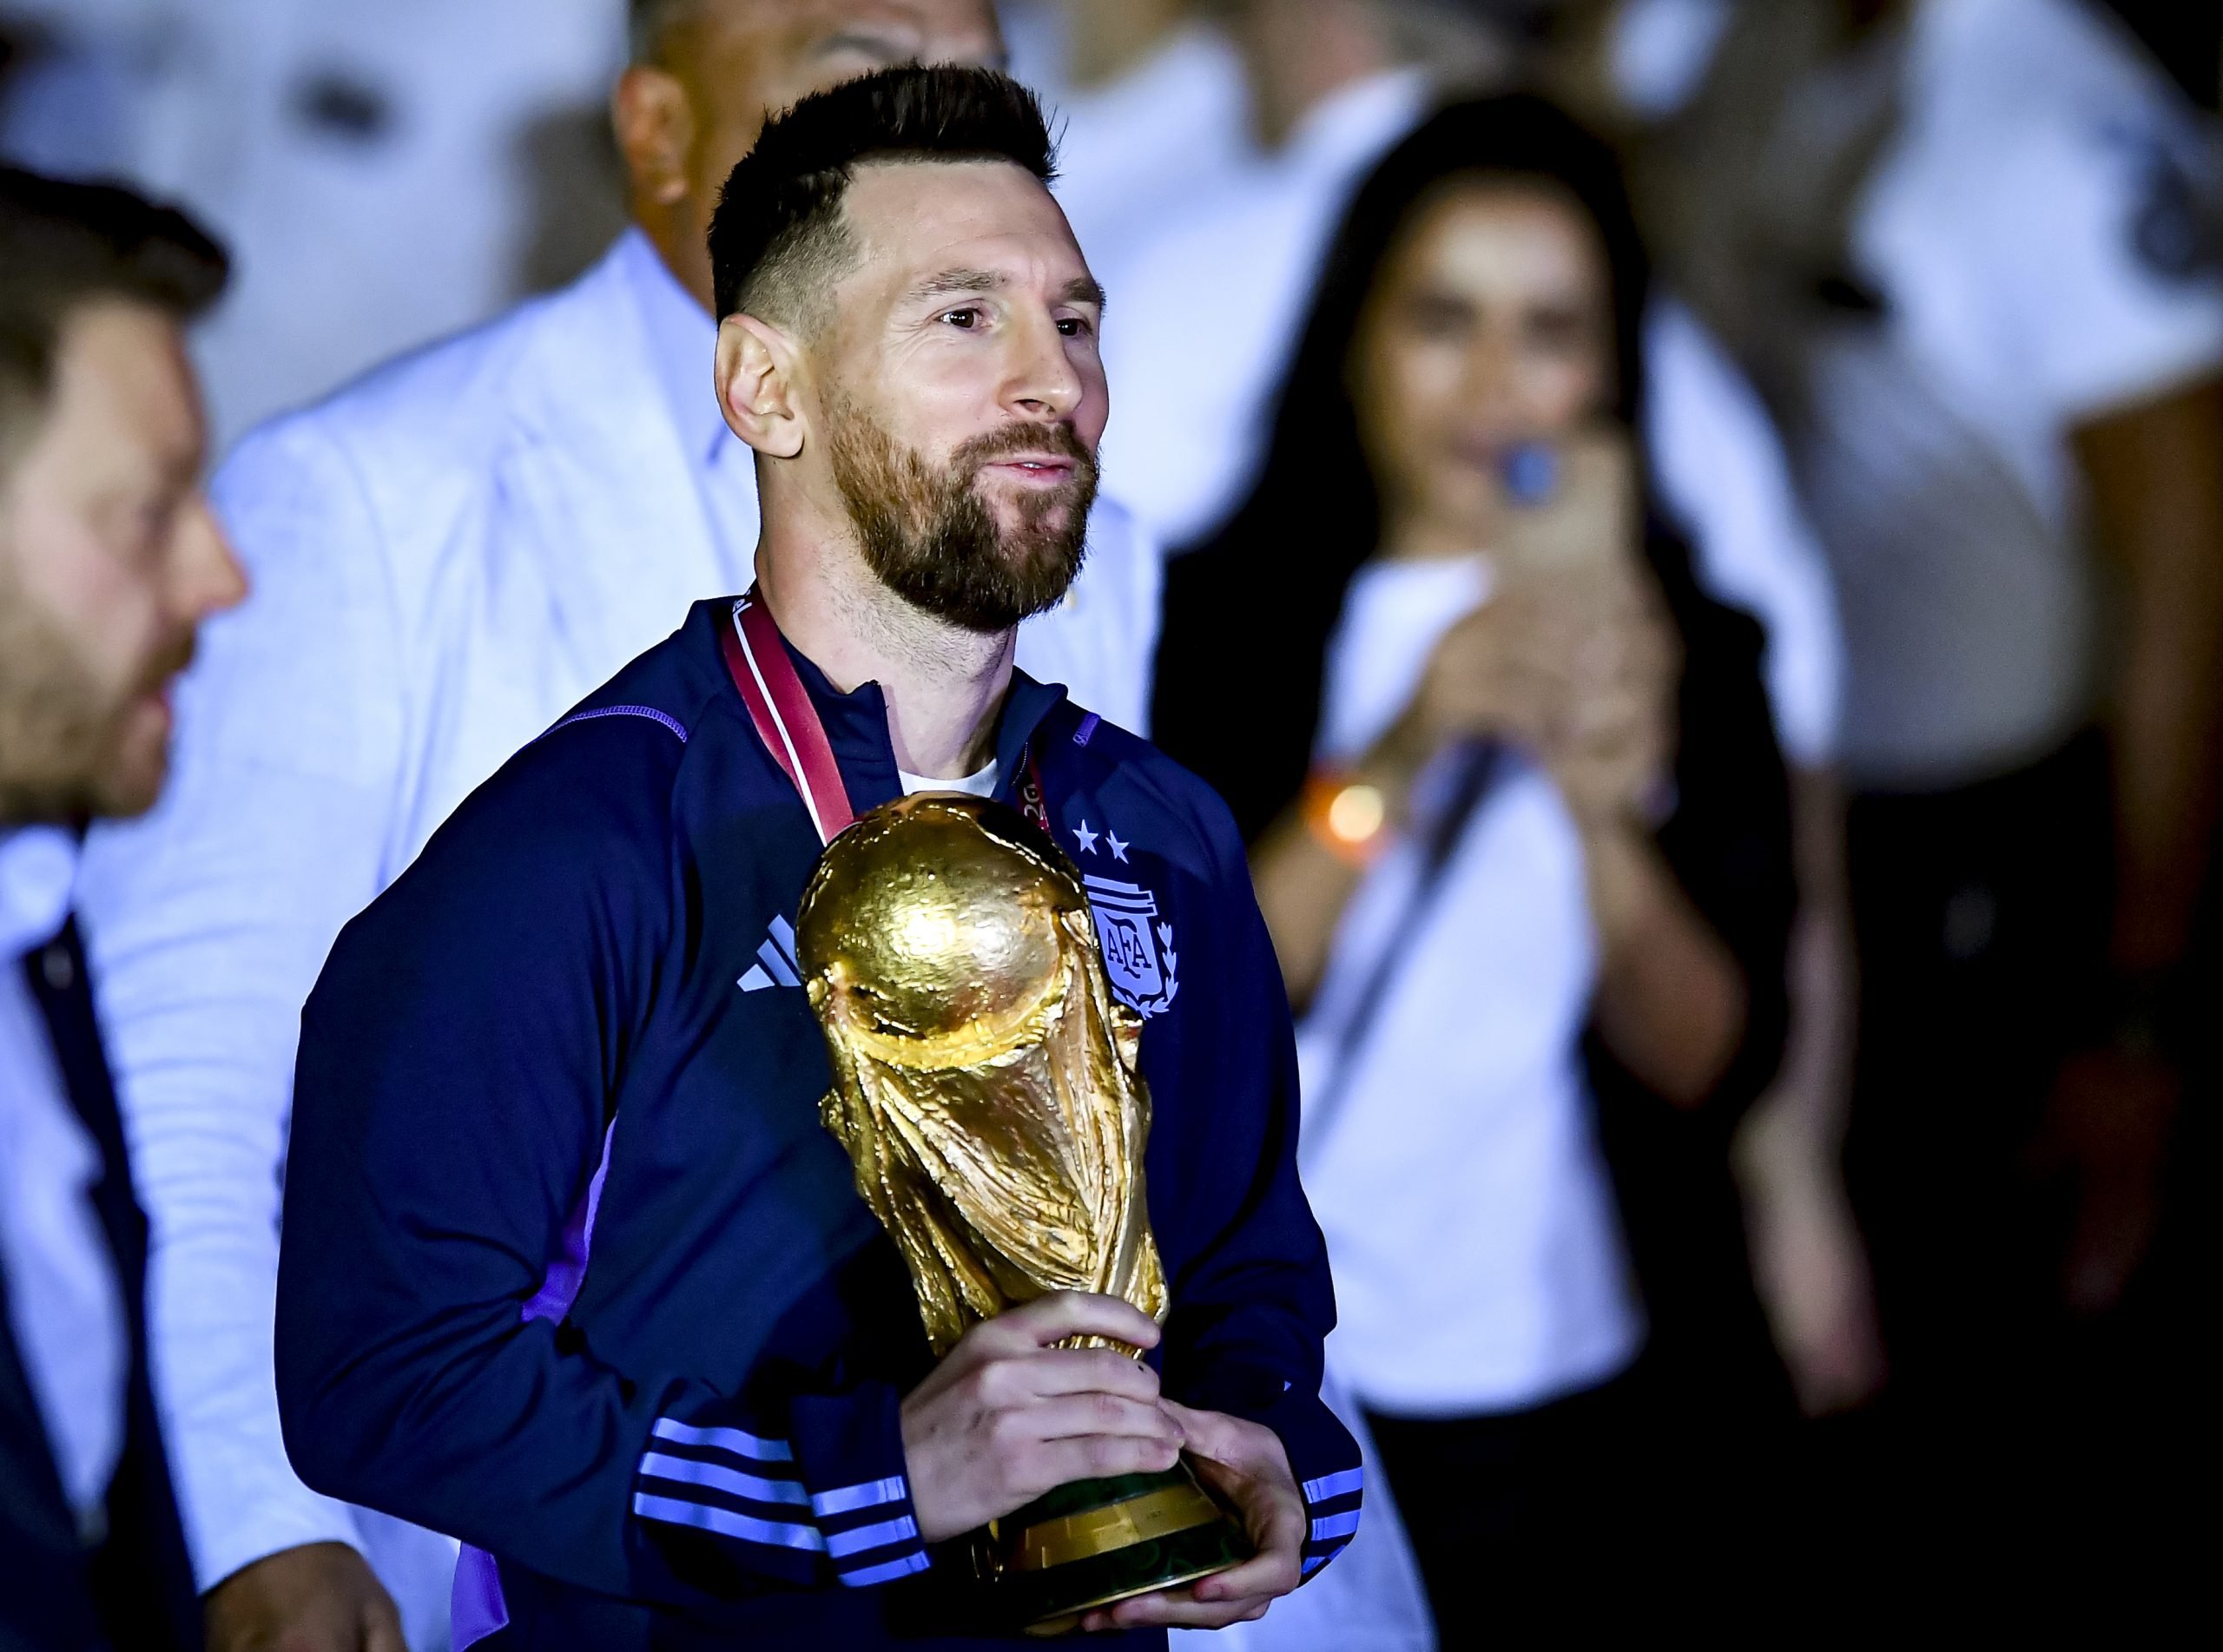 Who's the greatest of all time? Cristiano Ronaldo or Lionel Messi?': World  record holder egg asks